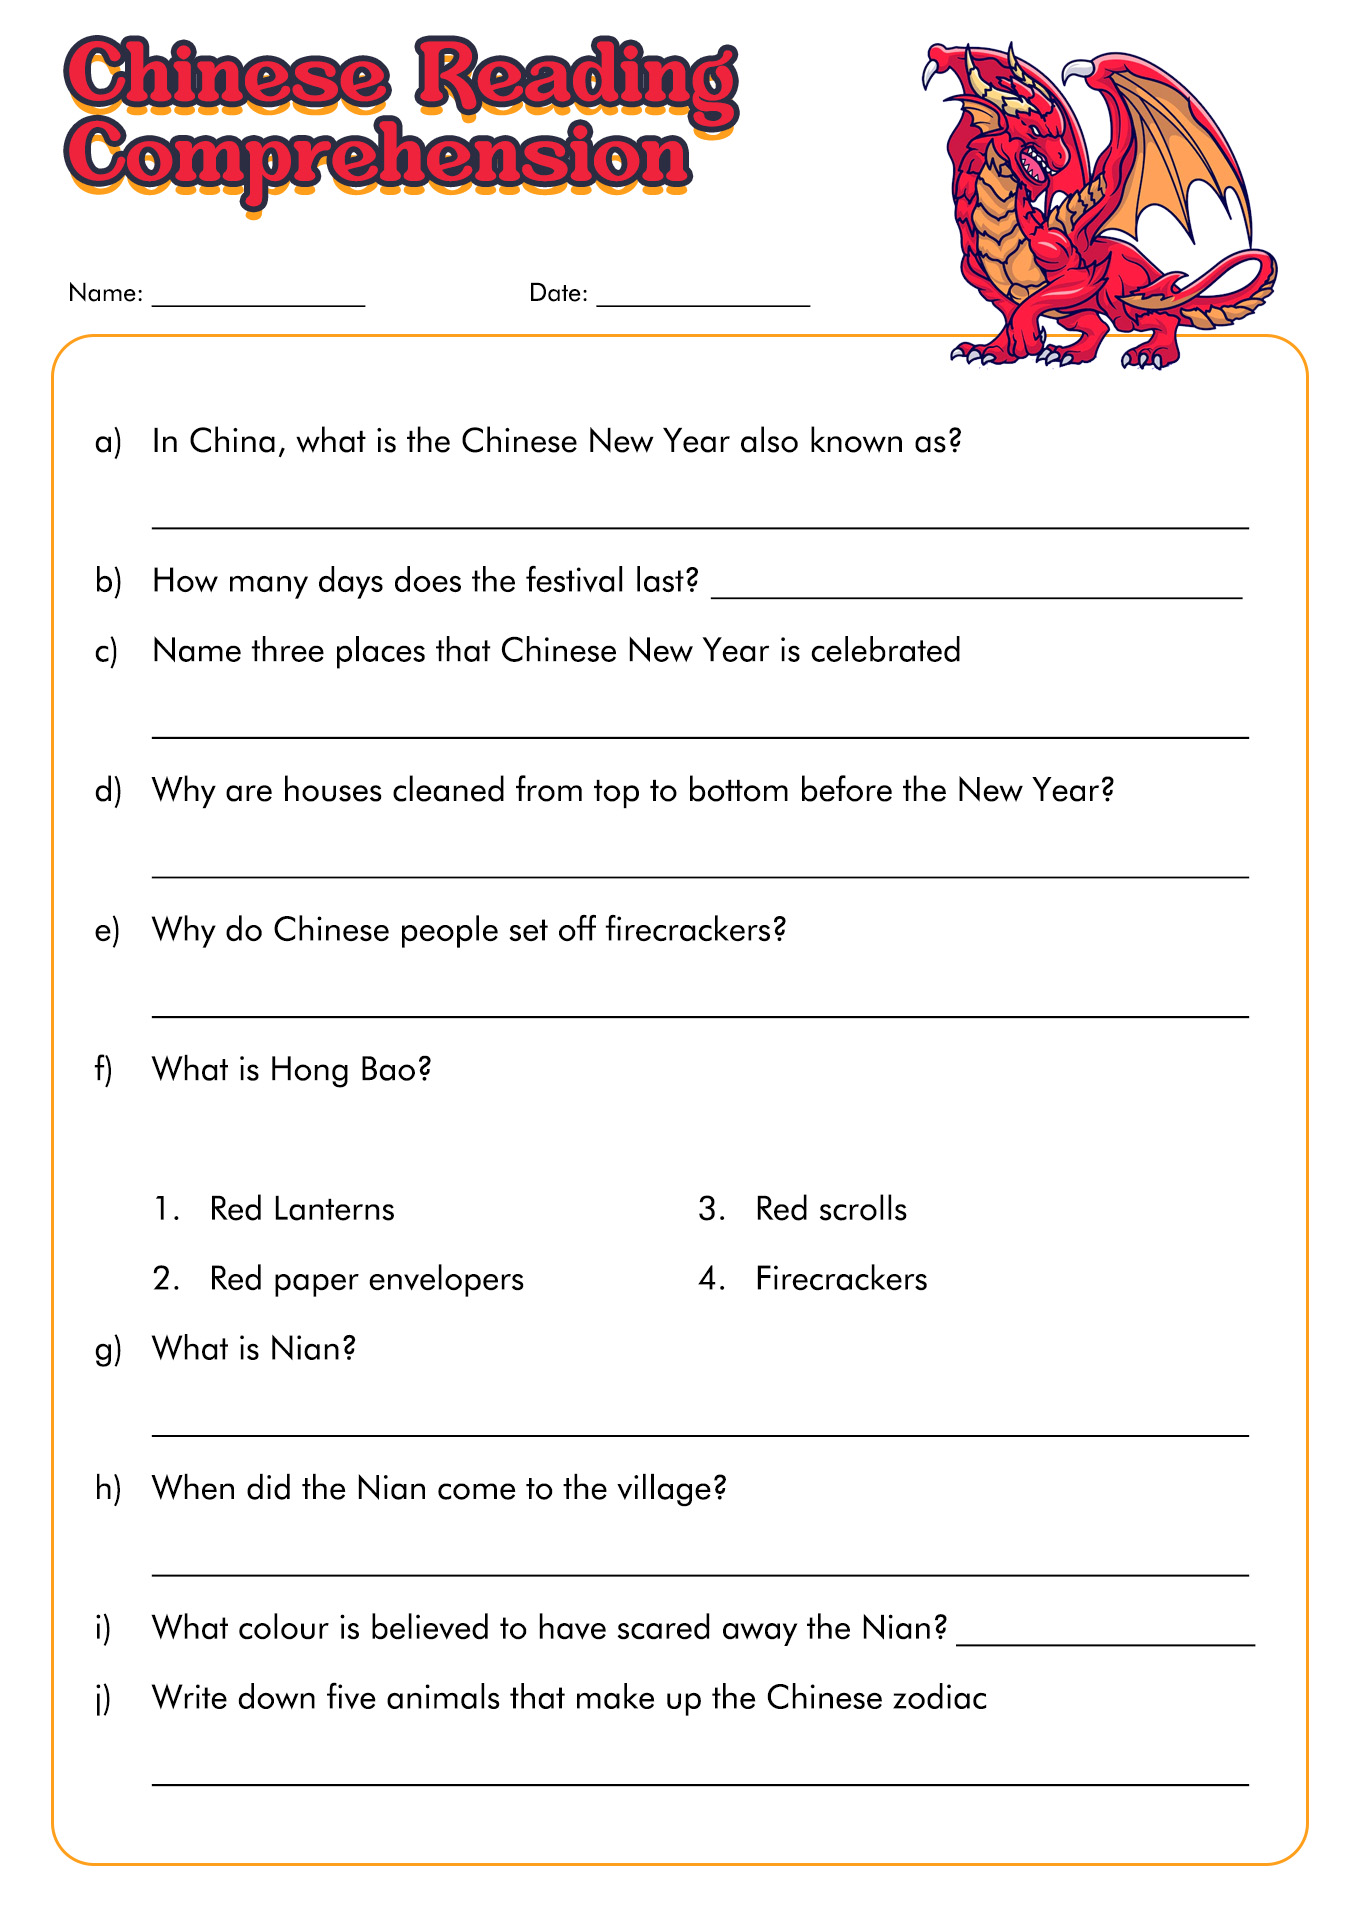 Chinese New Year Reading Comprehension